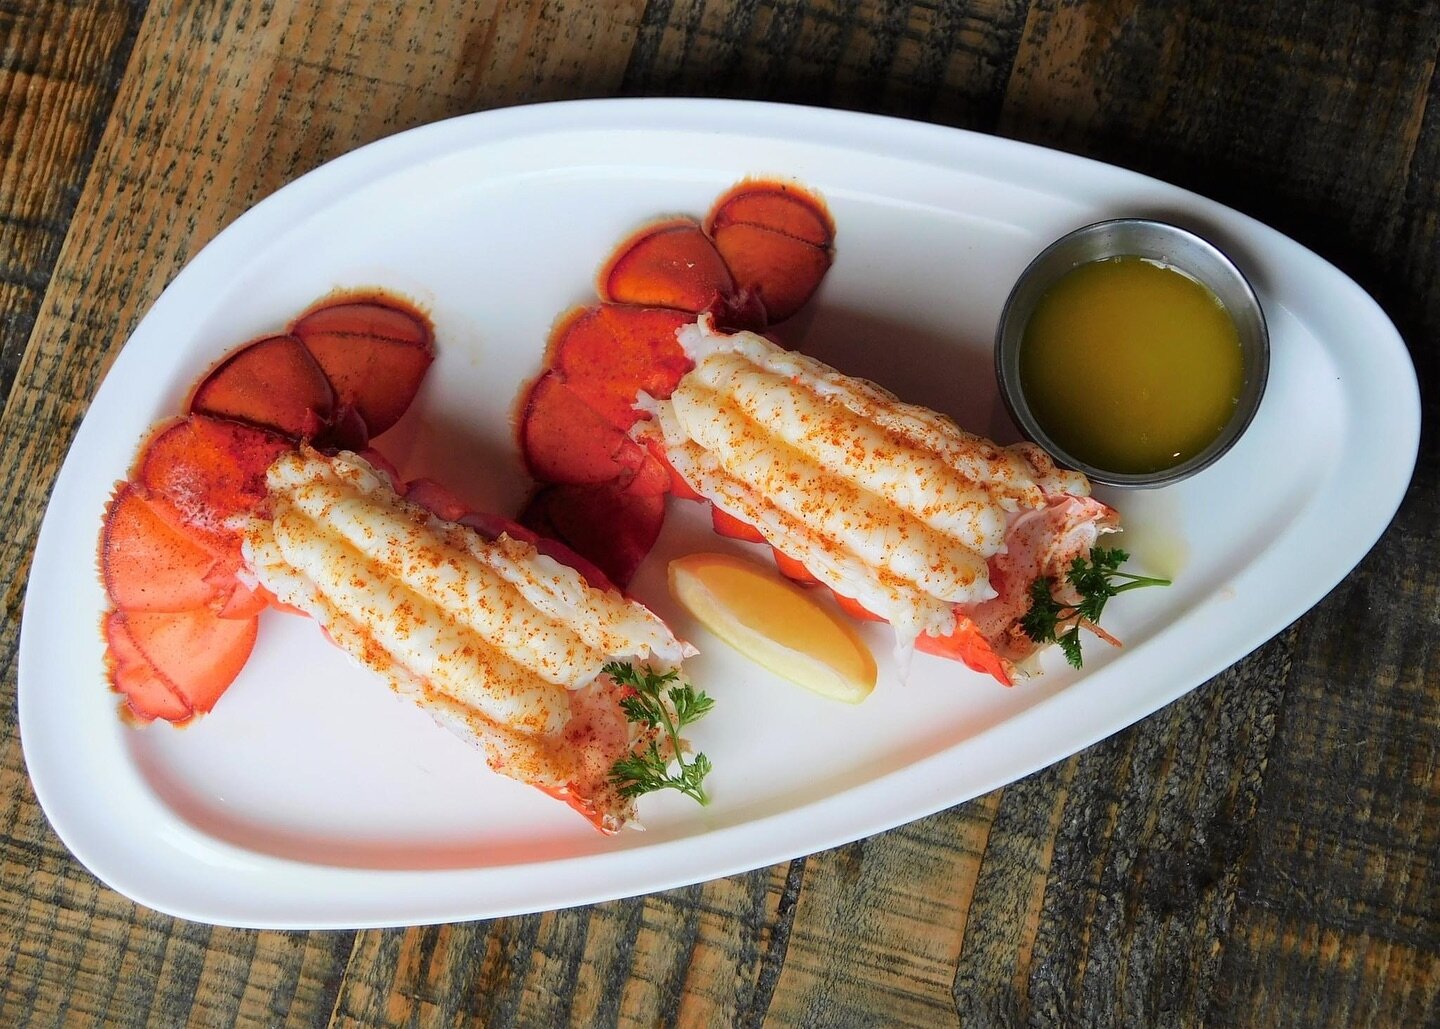 Cold Water Lobster Tails 🦞 Now available on our Dinner Menu! 

A pair of seasoned and grilled 4-5 ounce cold-water lobster tails. Served with hot drawn butter. Or choose three tails! Served with your choice of salad or side.